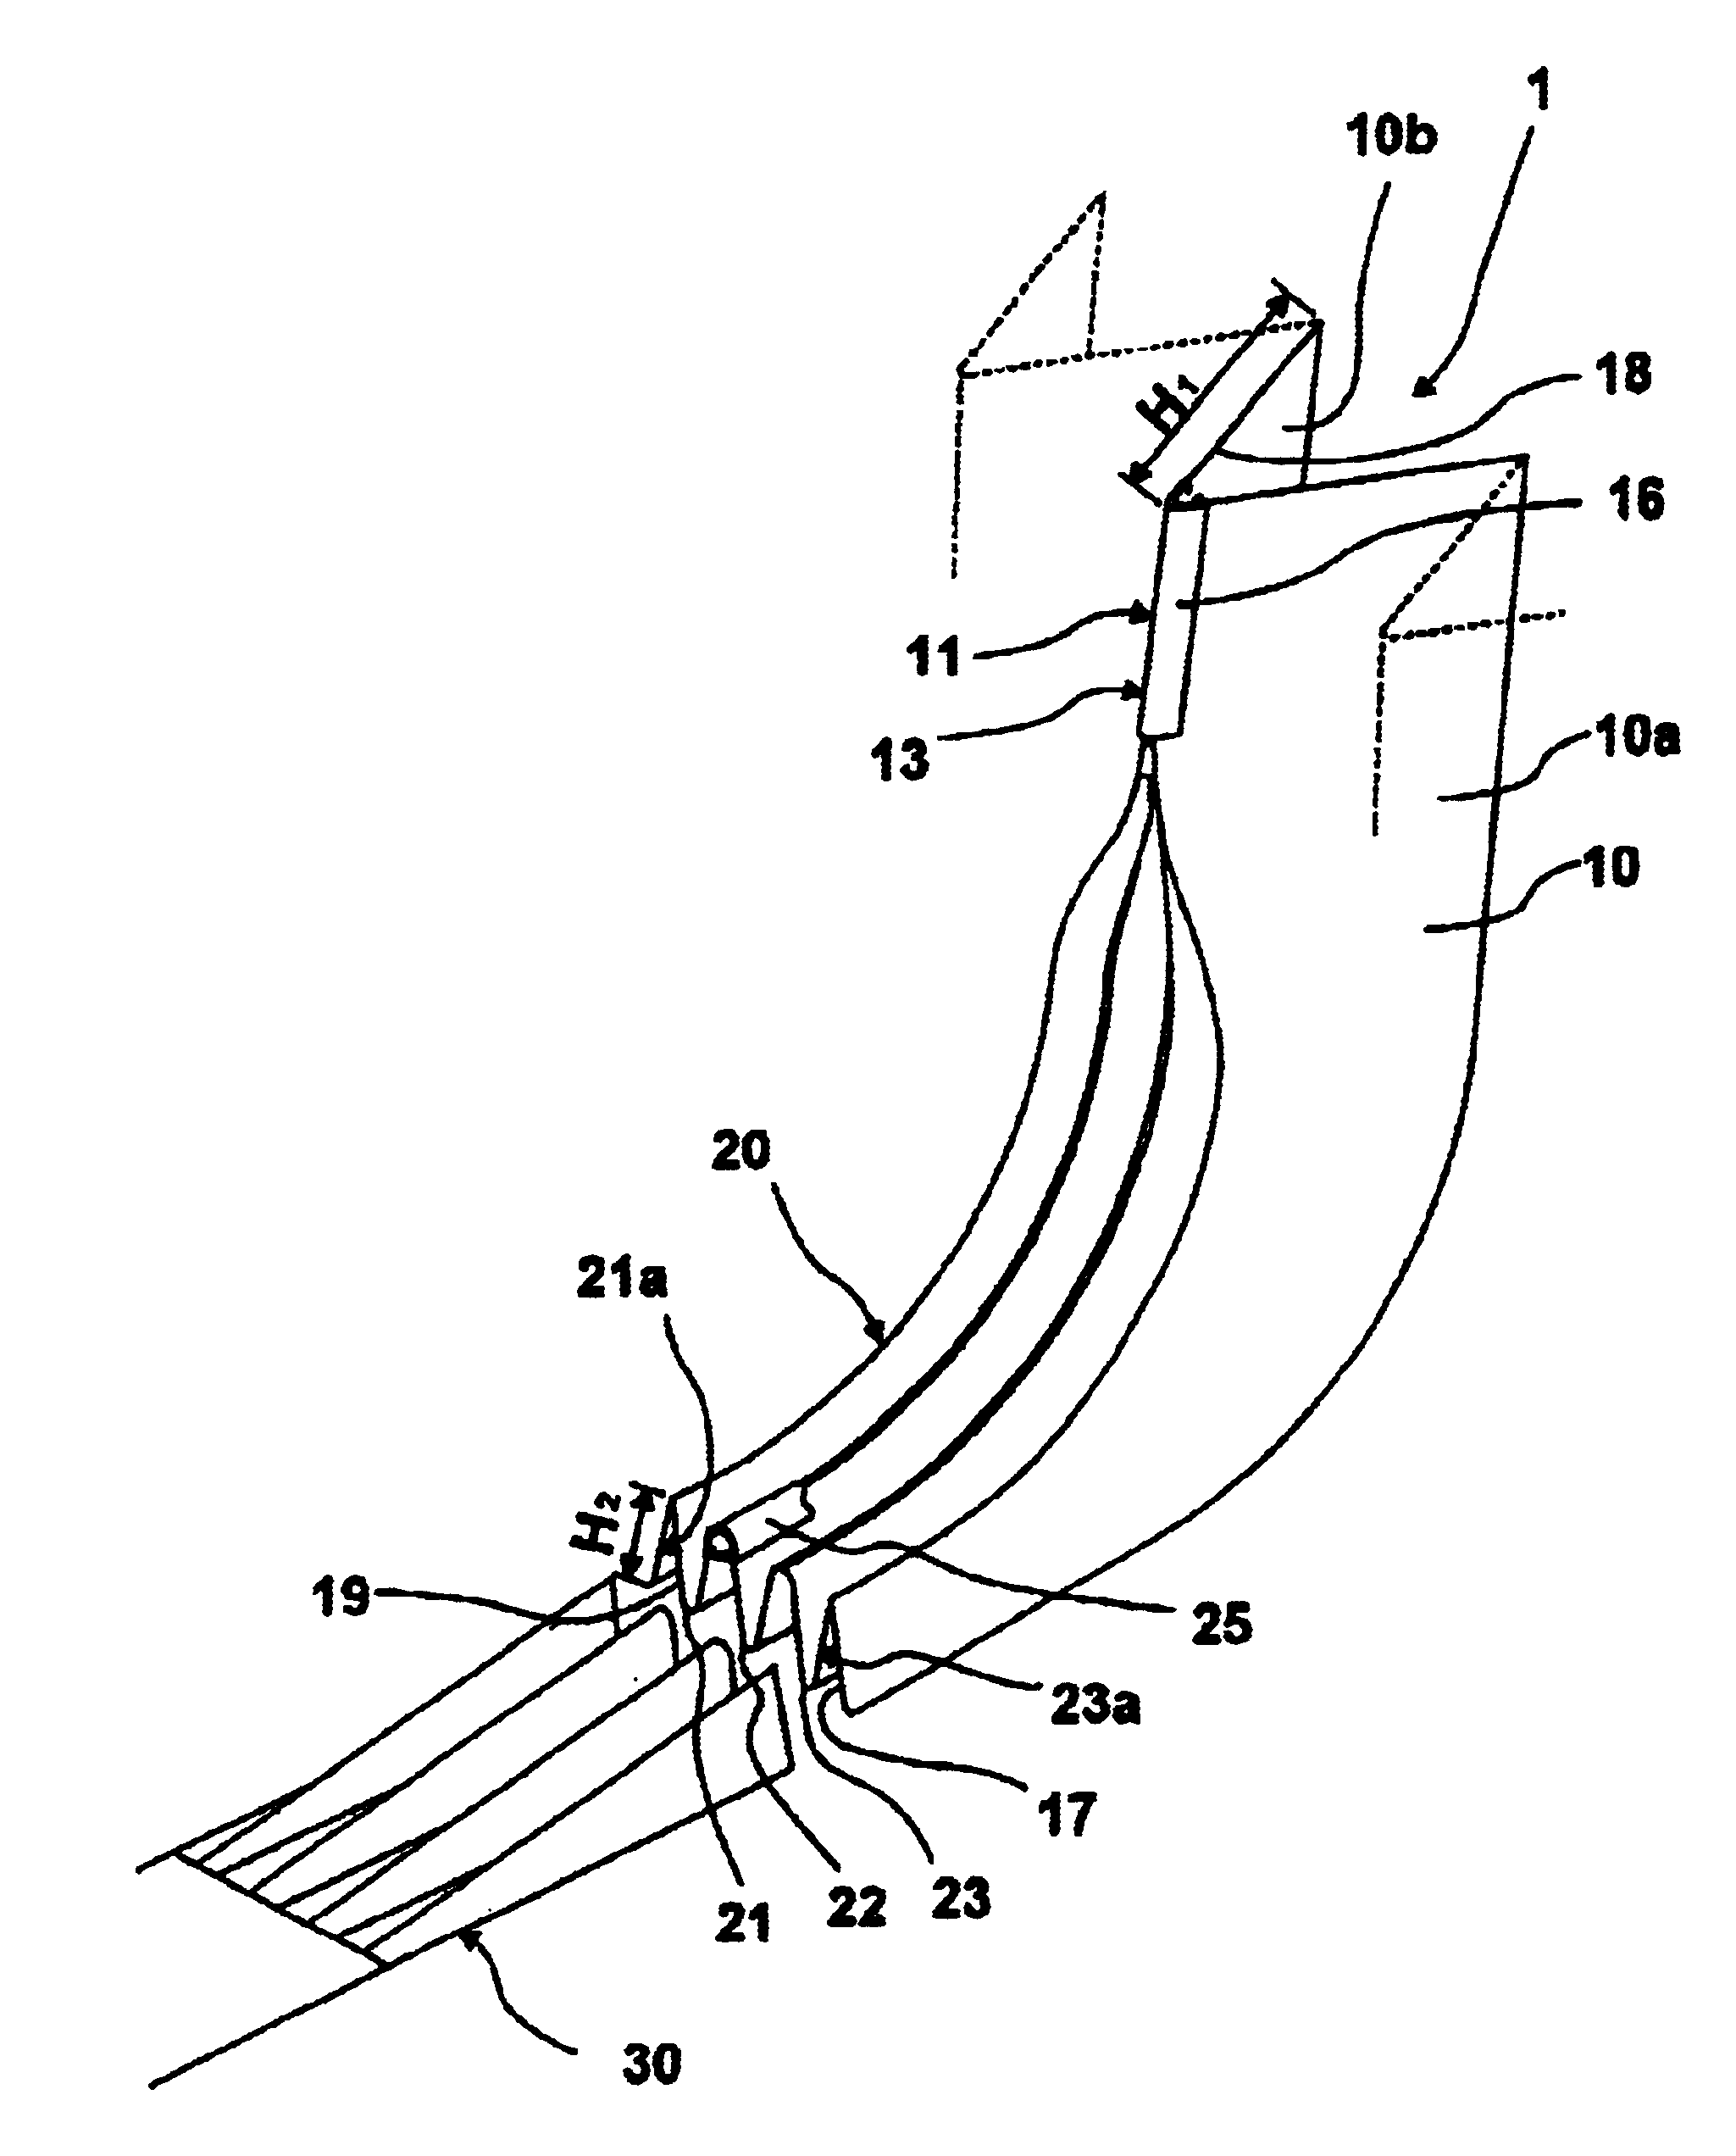 Pleat or corrugation of a bellows of a connection between two hinge-linked vehicles or vehicle sections e.g., of an articulated bus